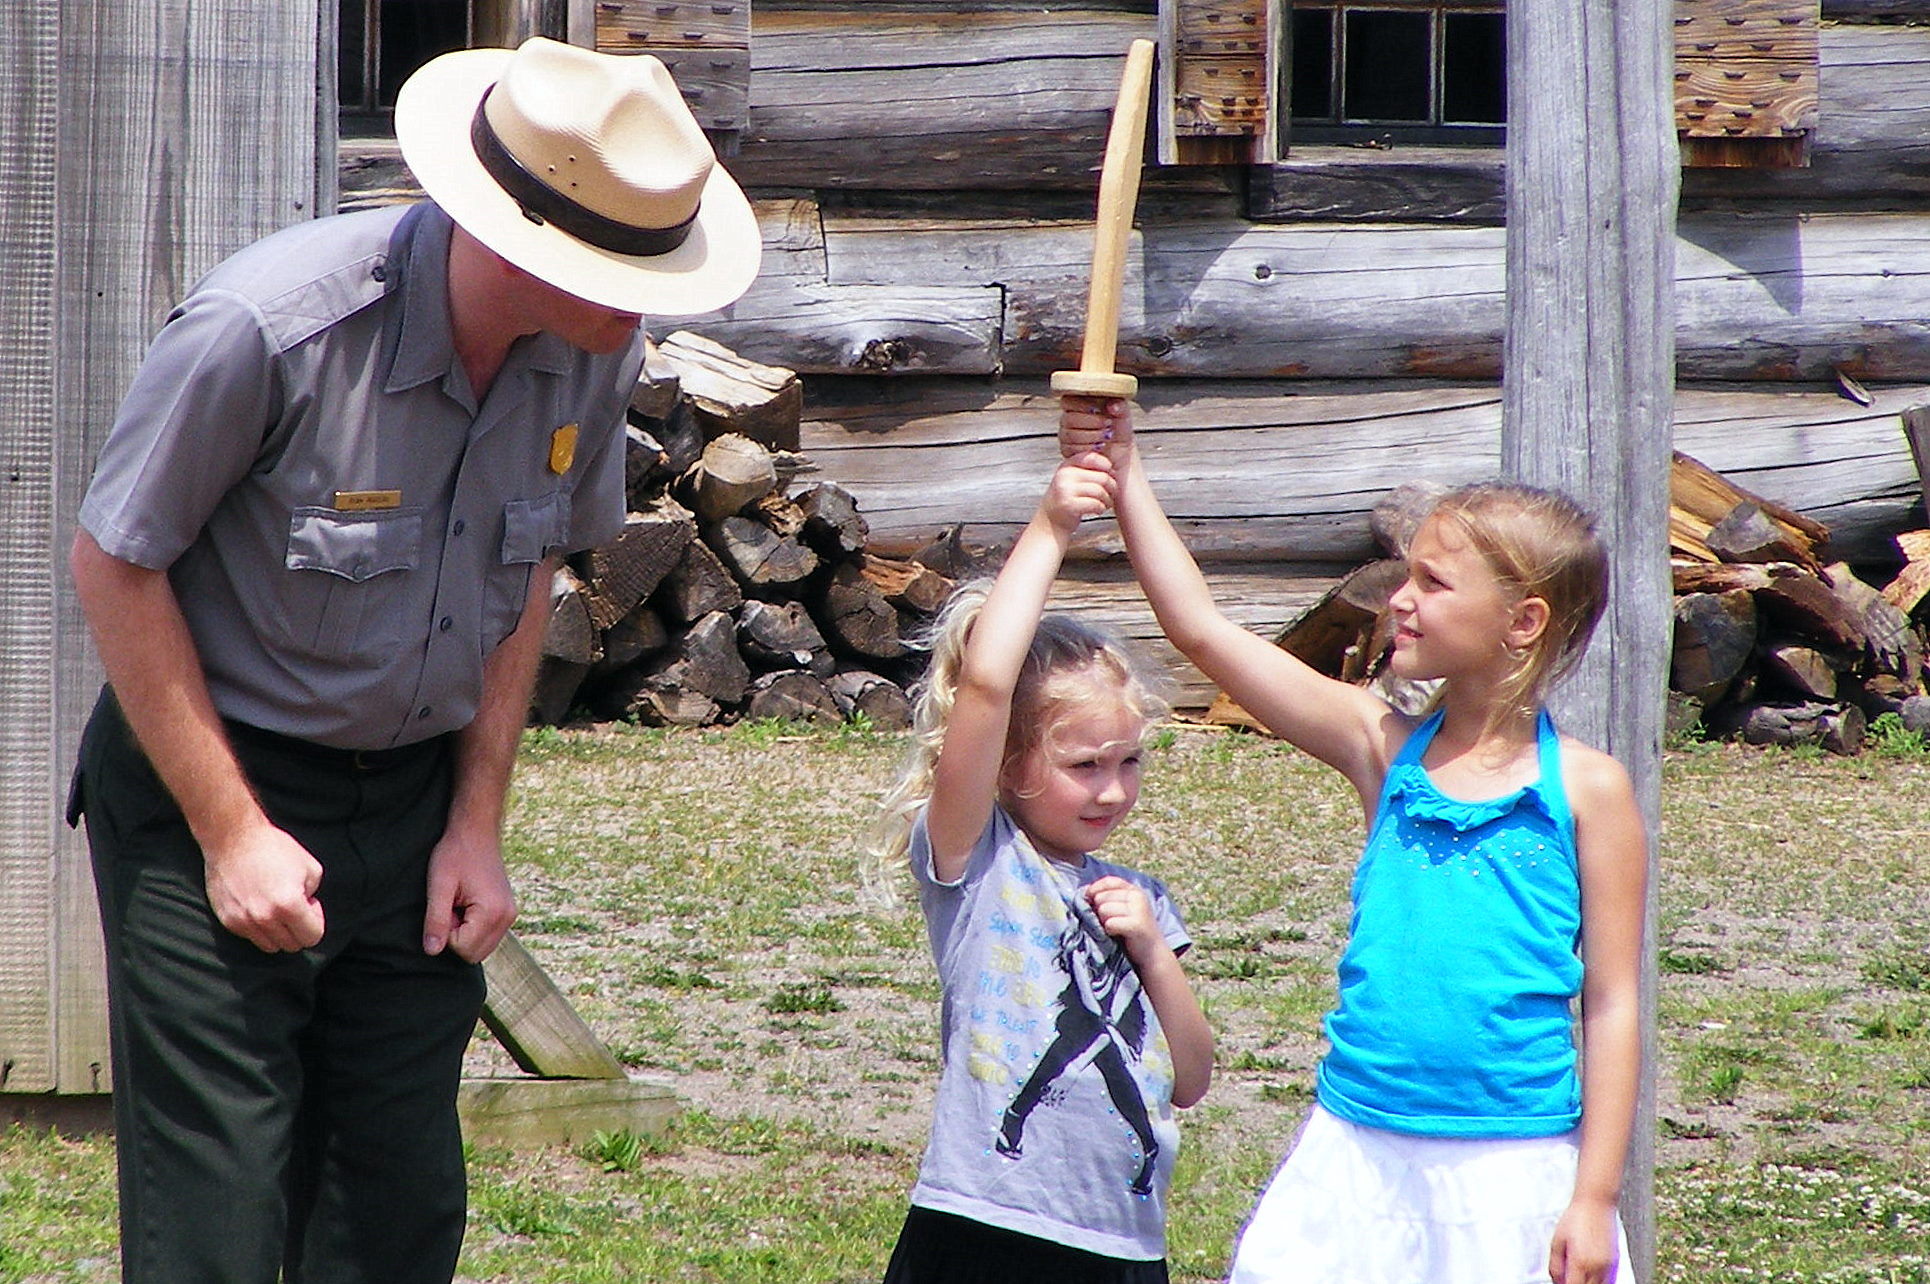 A little girl and her sister hold a wooden sword next to a park ranger.